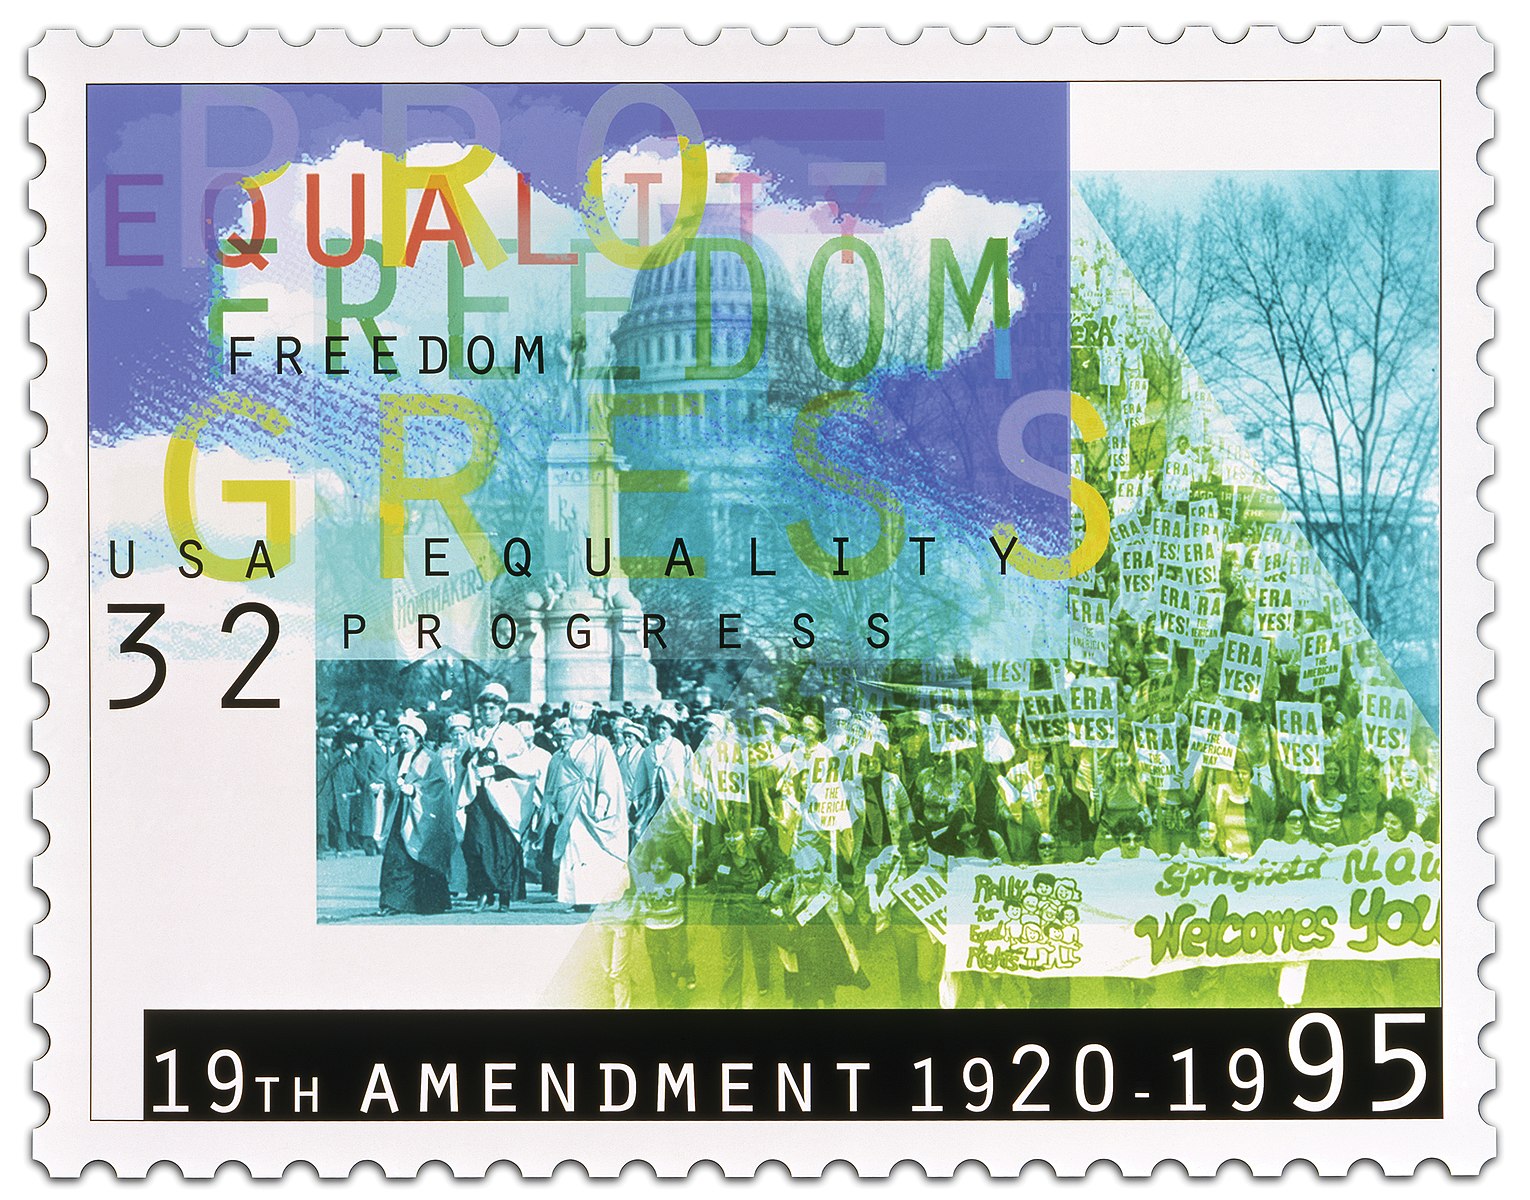 A 32-cent Women's Suffrage commemorative US postal stamp issued in 1995, on the 75th anniversary of the passage of the 19th Amendment. Stamp bears photographs of women's suffrage marches and the words "equality," "freedom," and "progress."